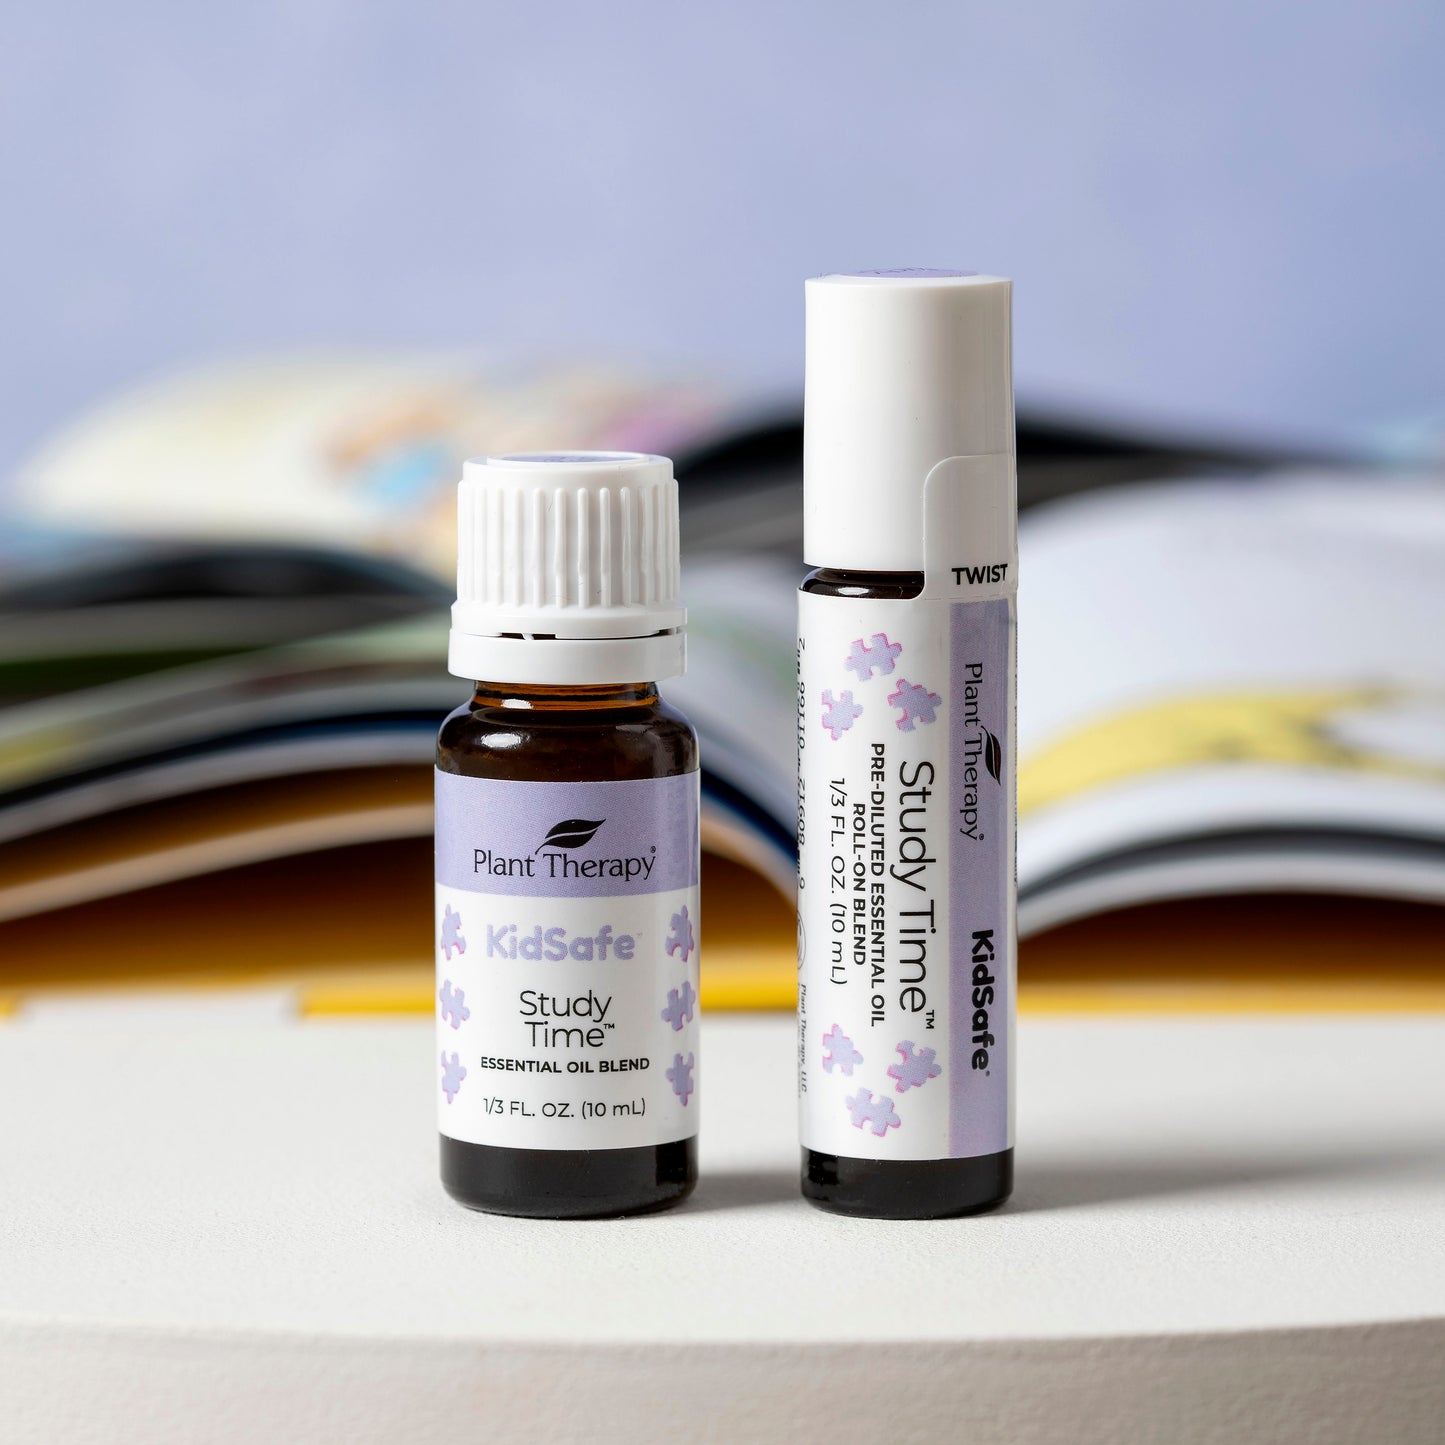 Study Time KidSafe Essential Oil Pre-Diluted Roll-On & Undiluted blend pictured next to textbooks